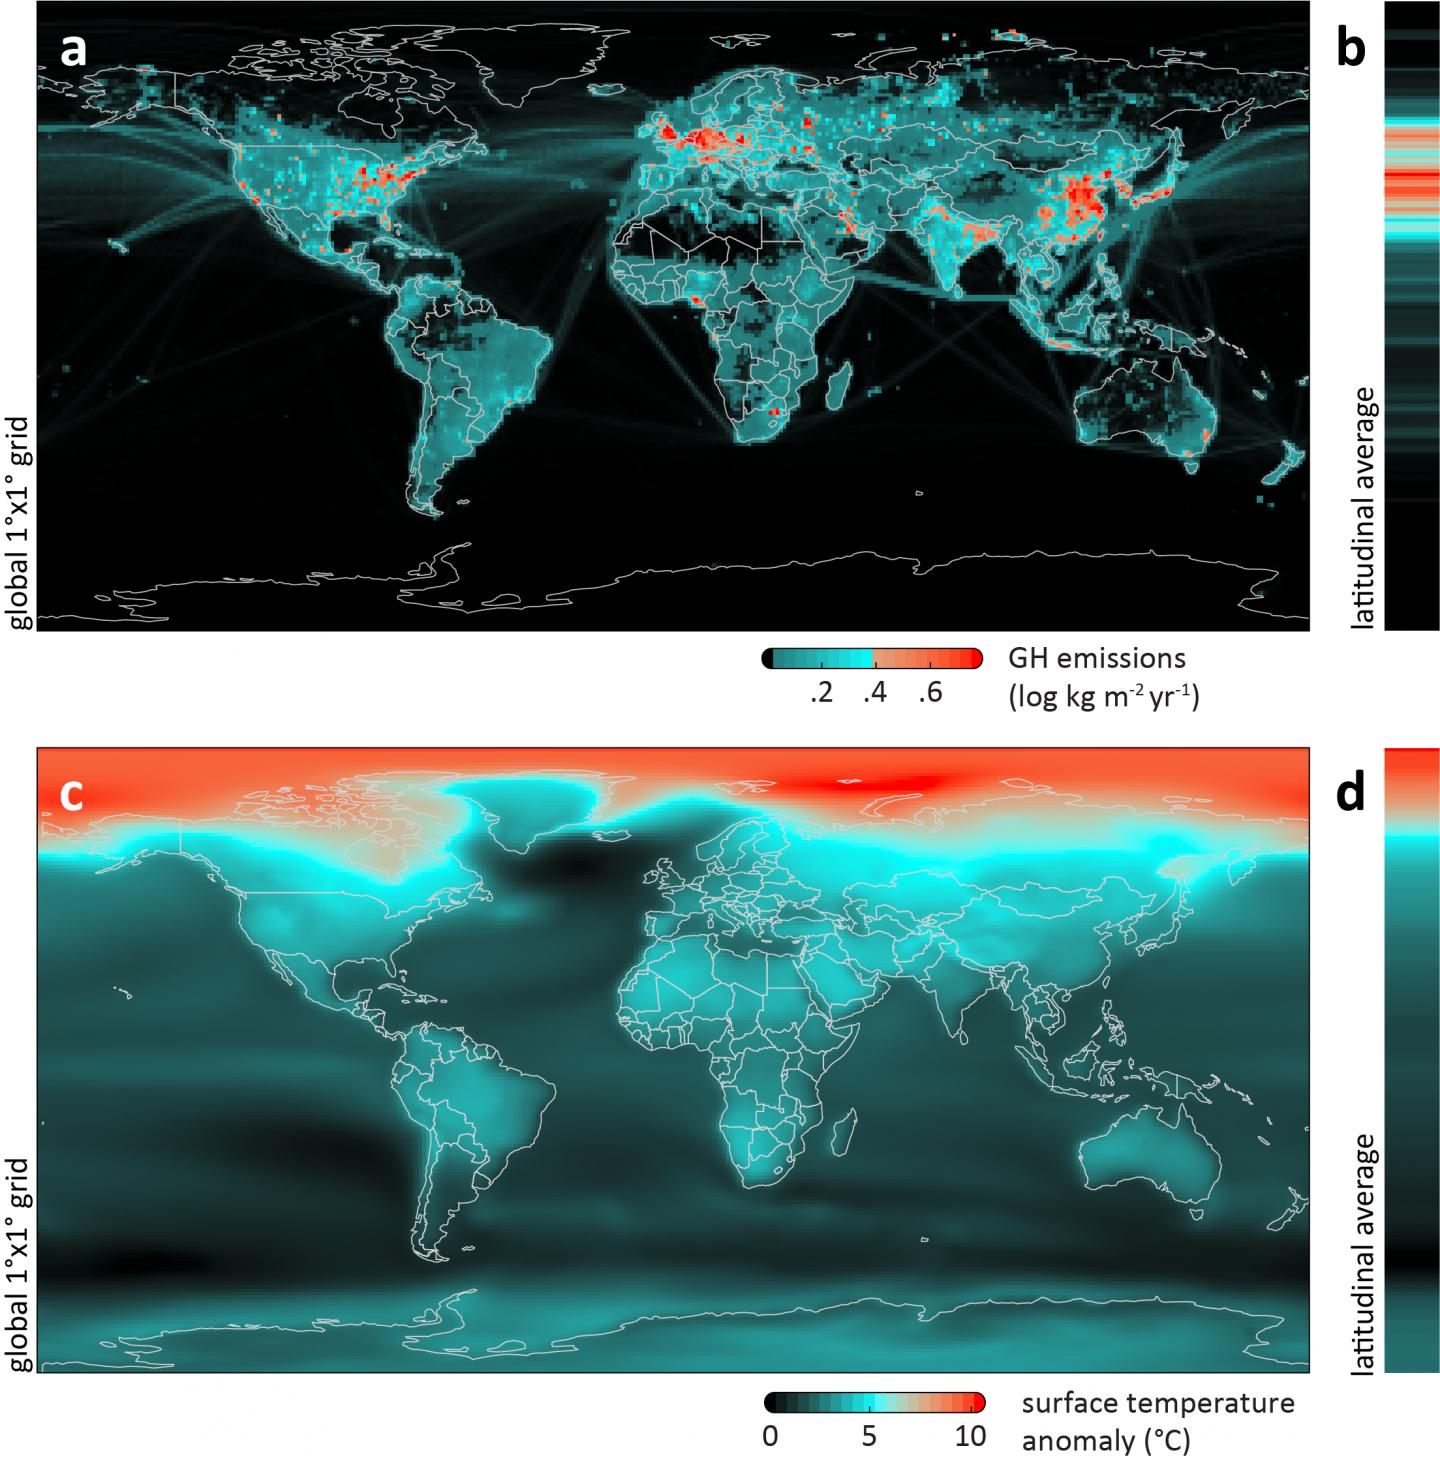 Figure 1. Spatial variability of global anthropogenic GH emissions and projected end-of-century temperature anomalies.